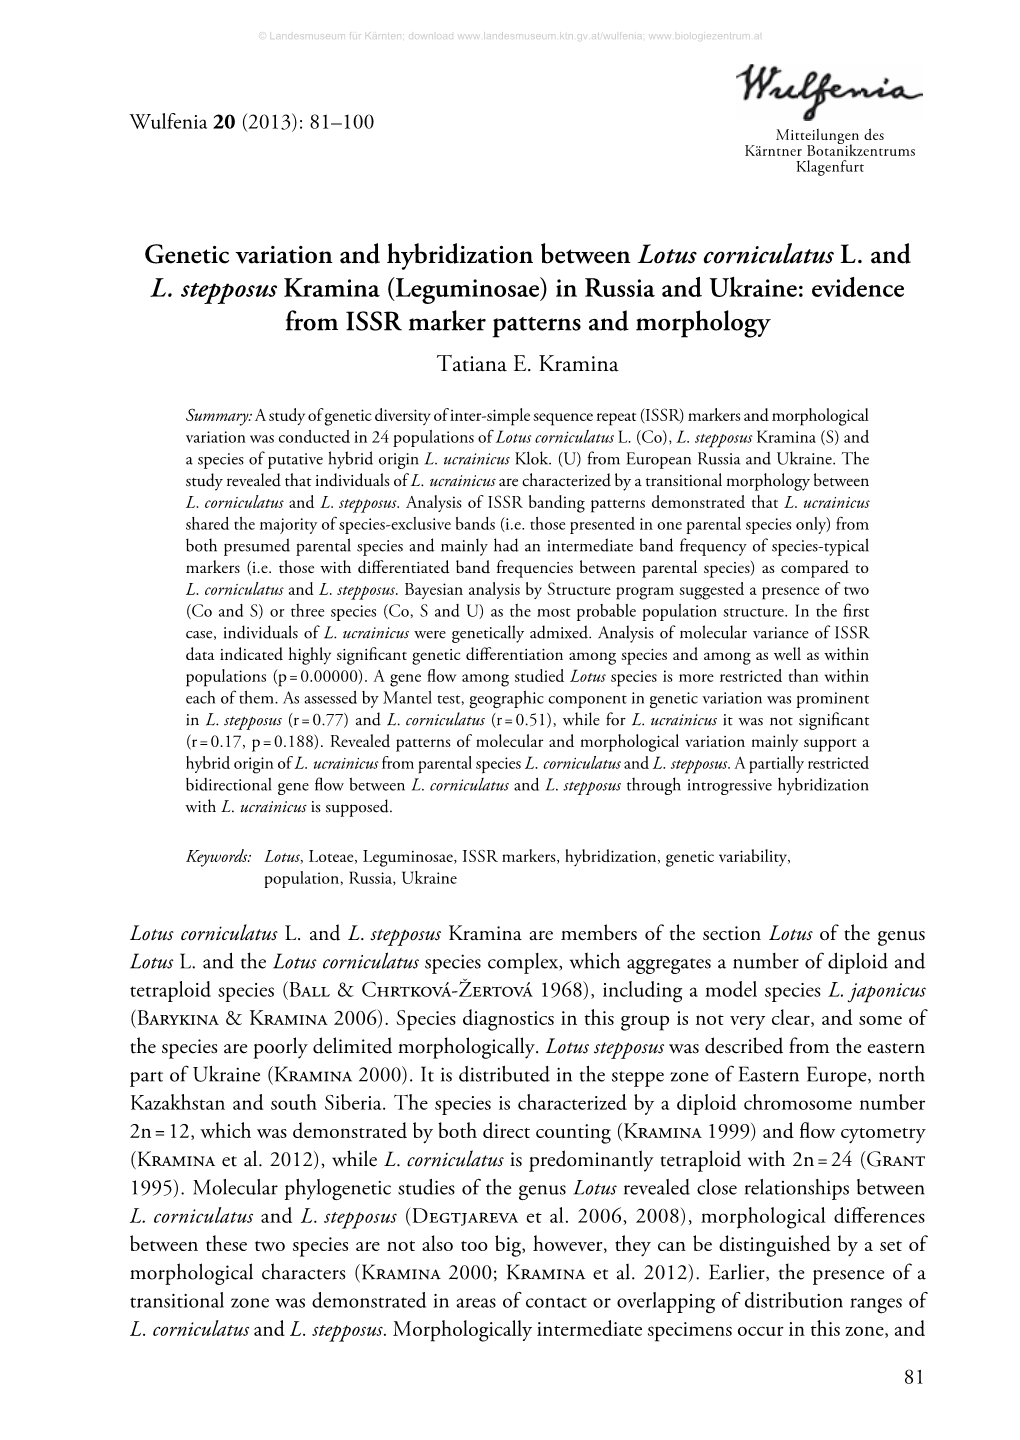 Genetic Variation and Hybridization Between Lotus Corniculatus L. and L